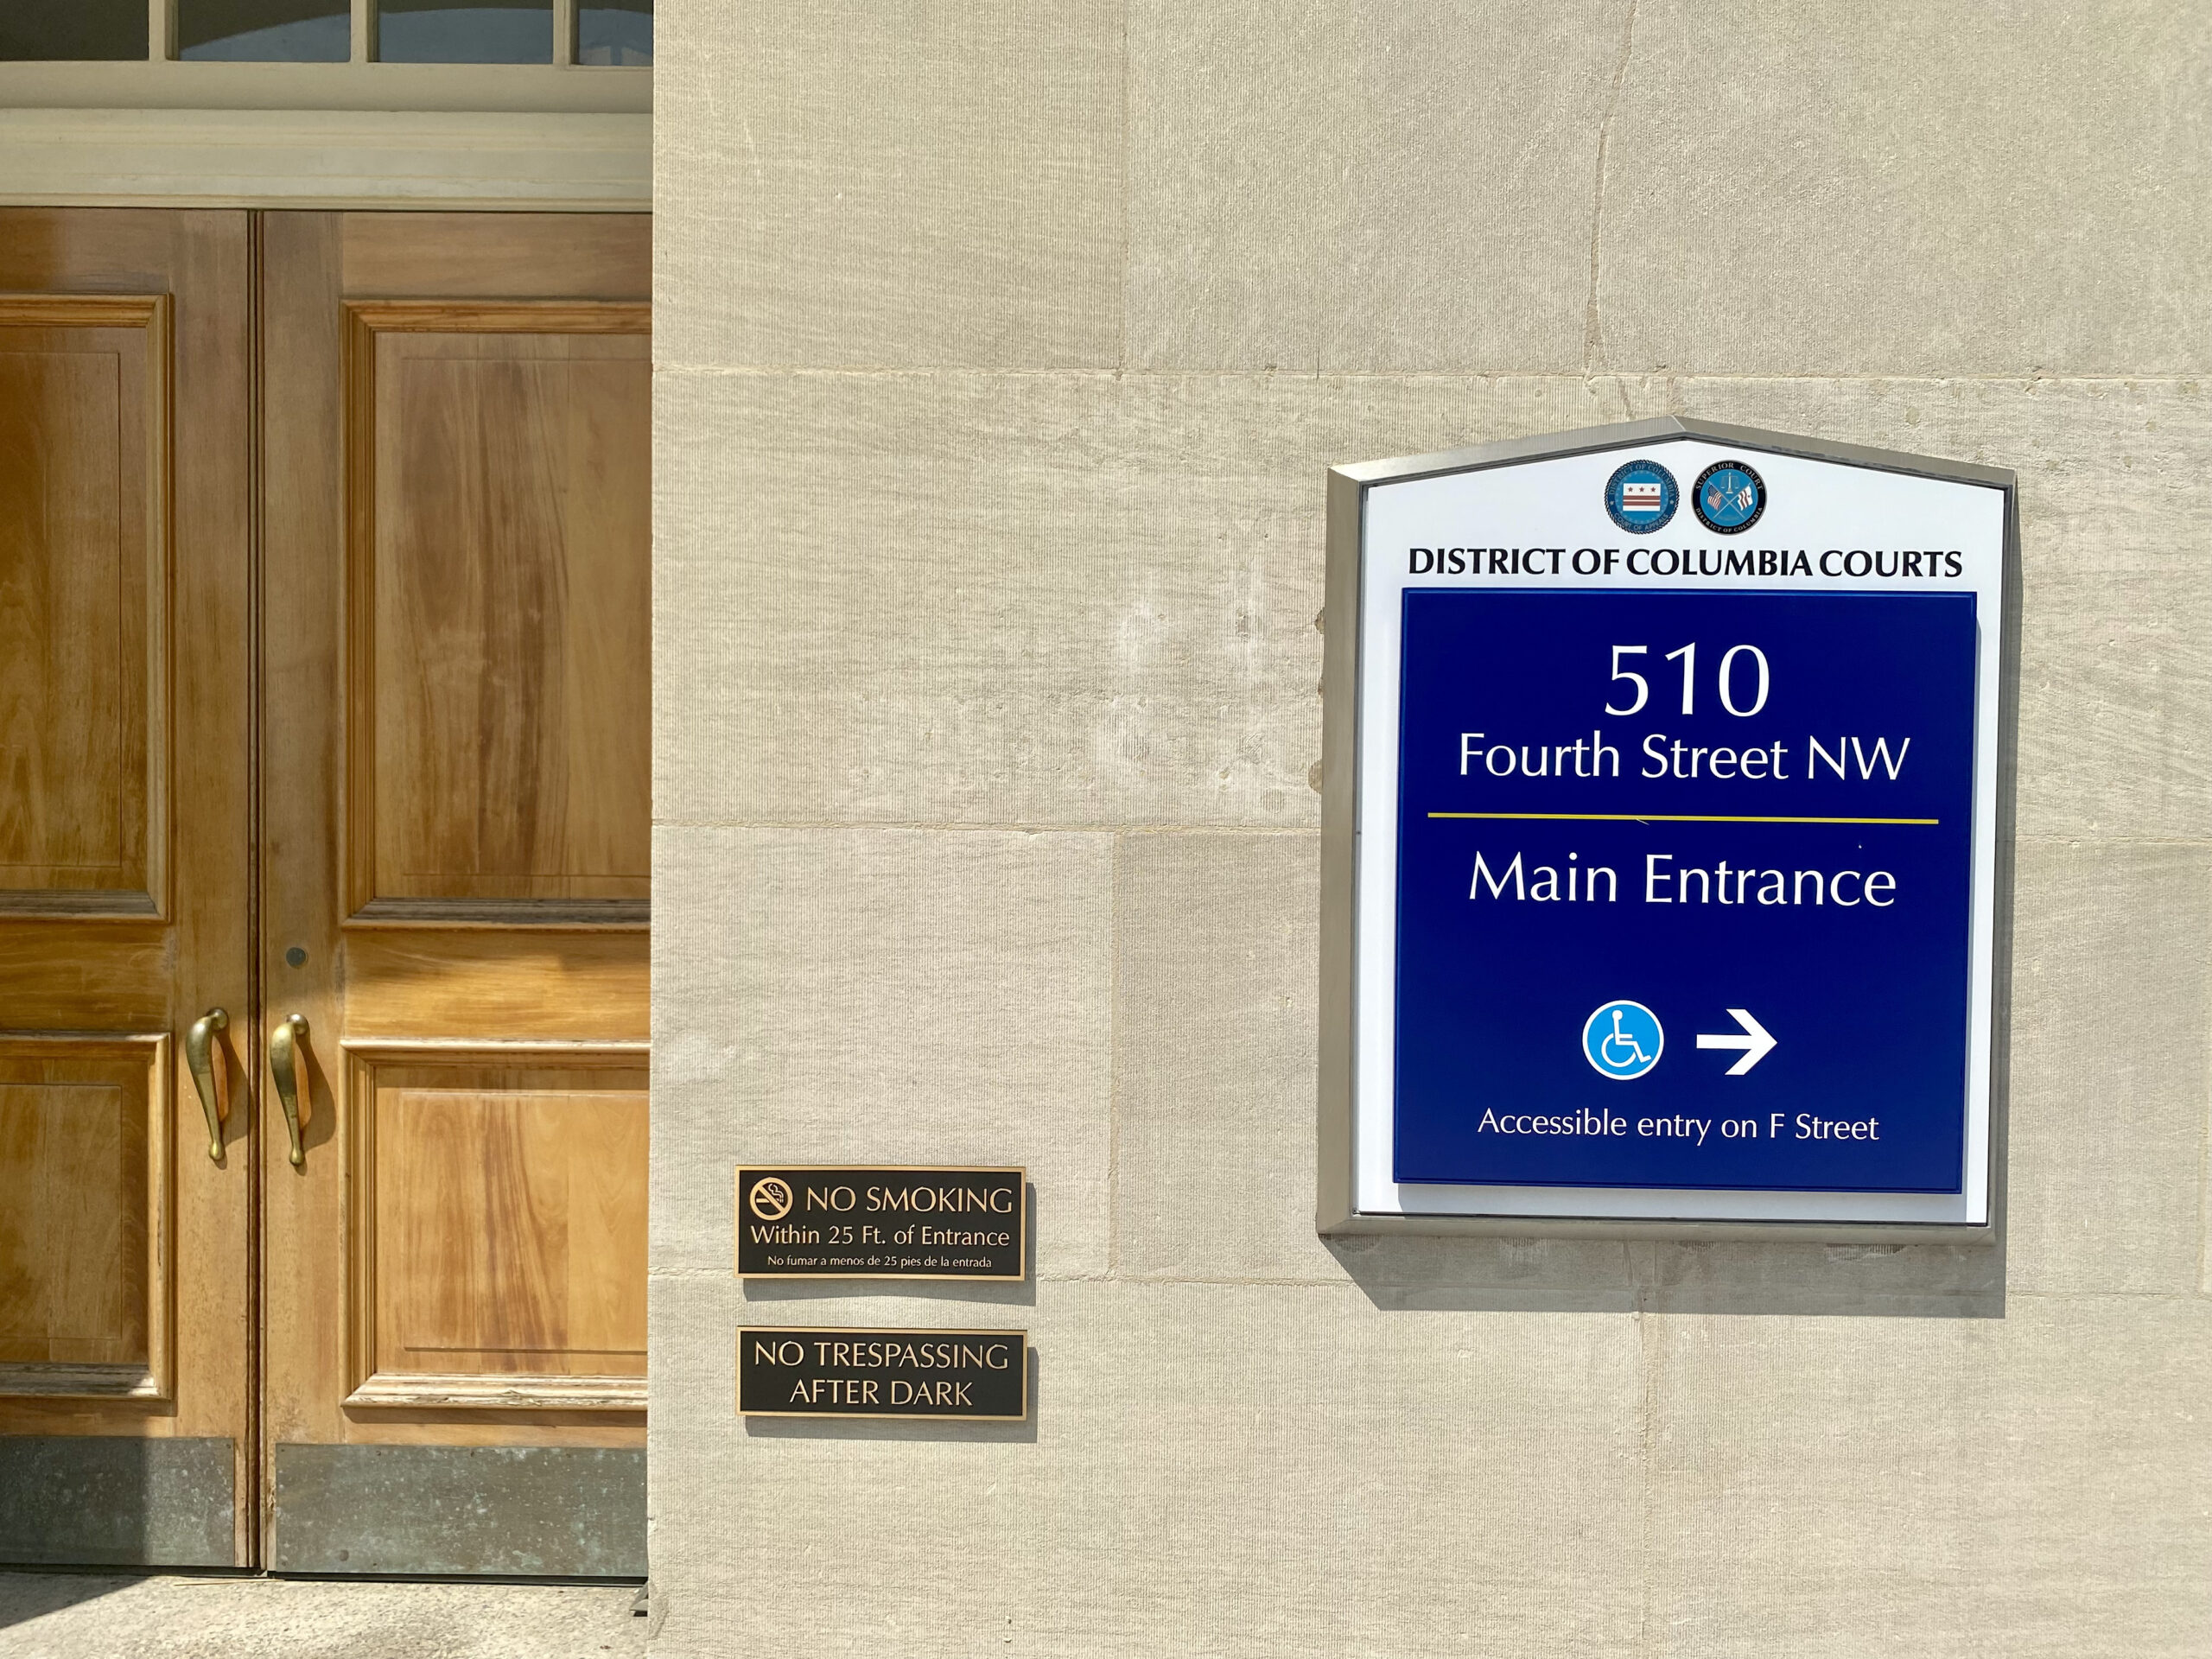 A blue sign reading "District of Columbia Courts, 510" next to a closed wooden door.